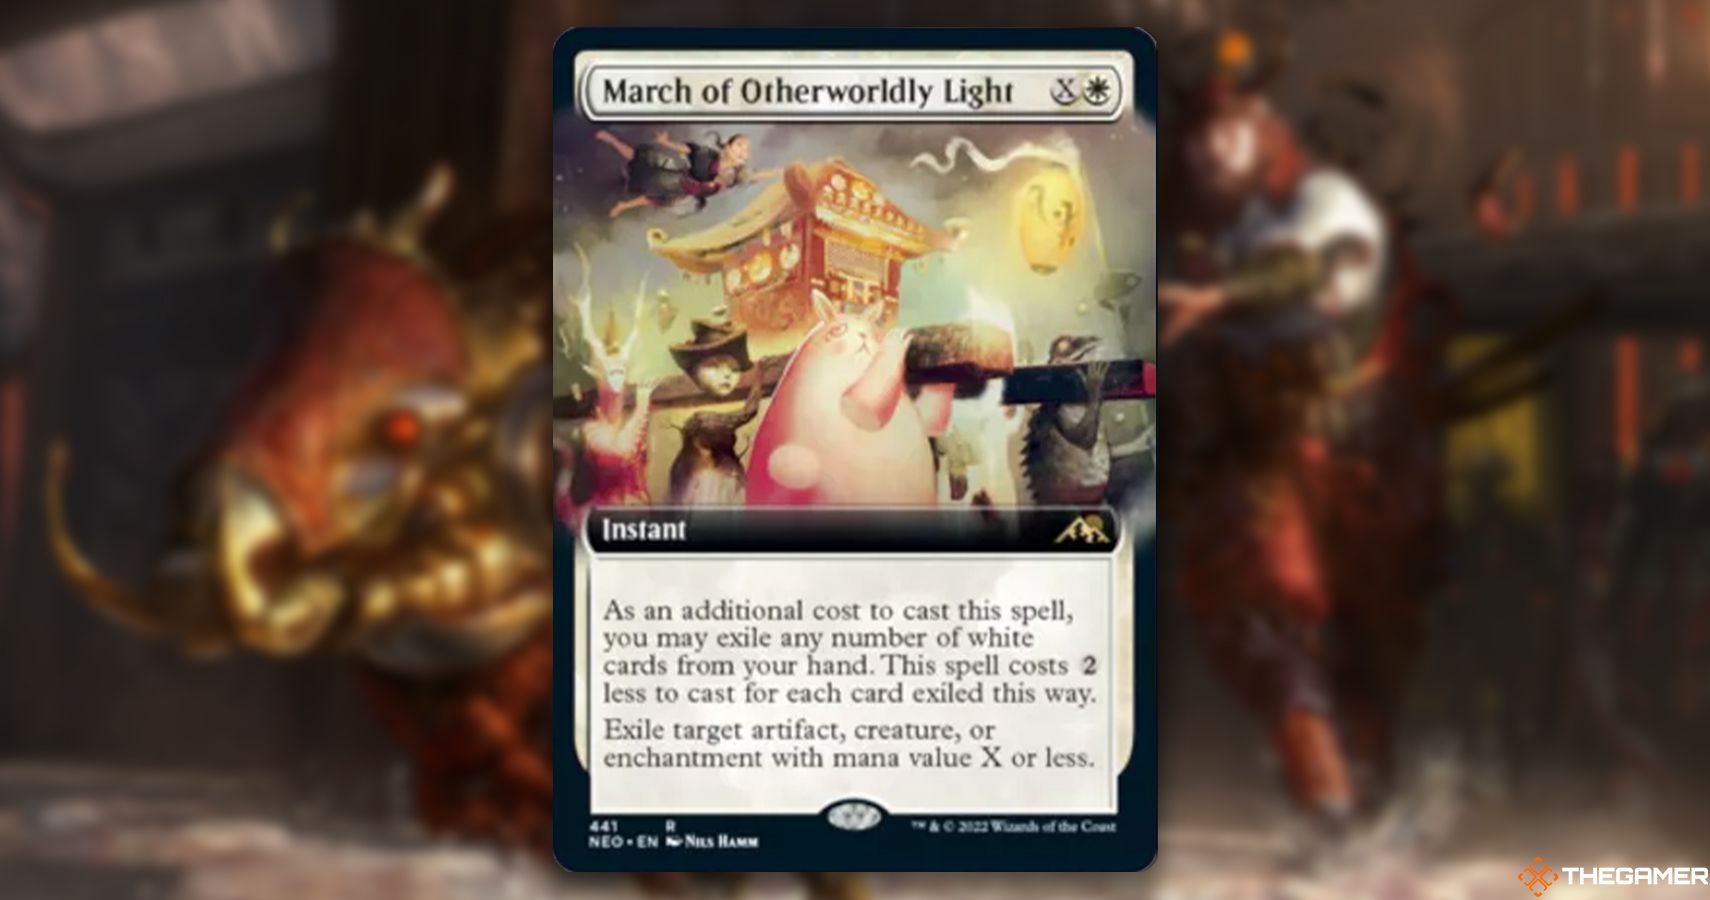 March of Otherworldly Light